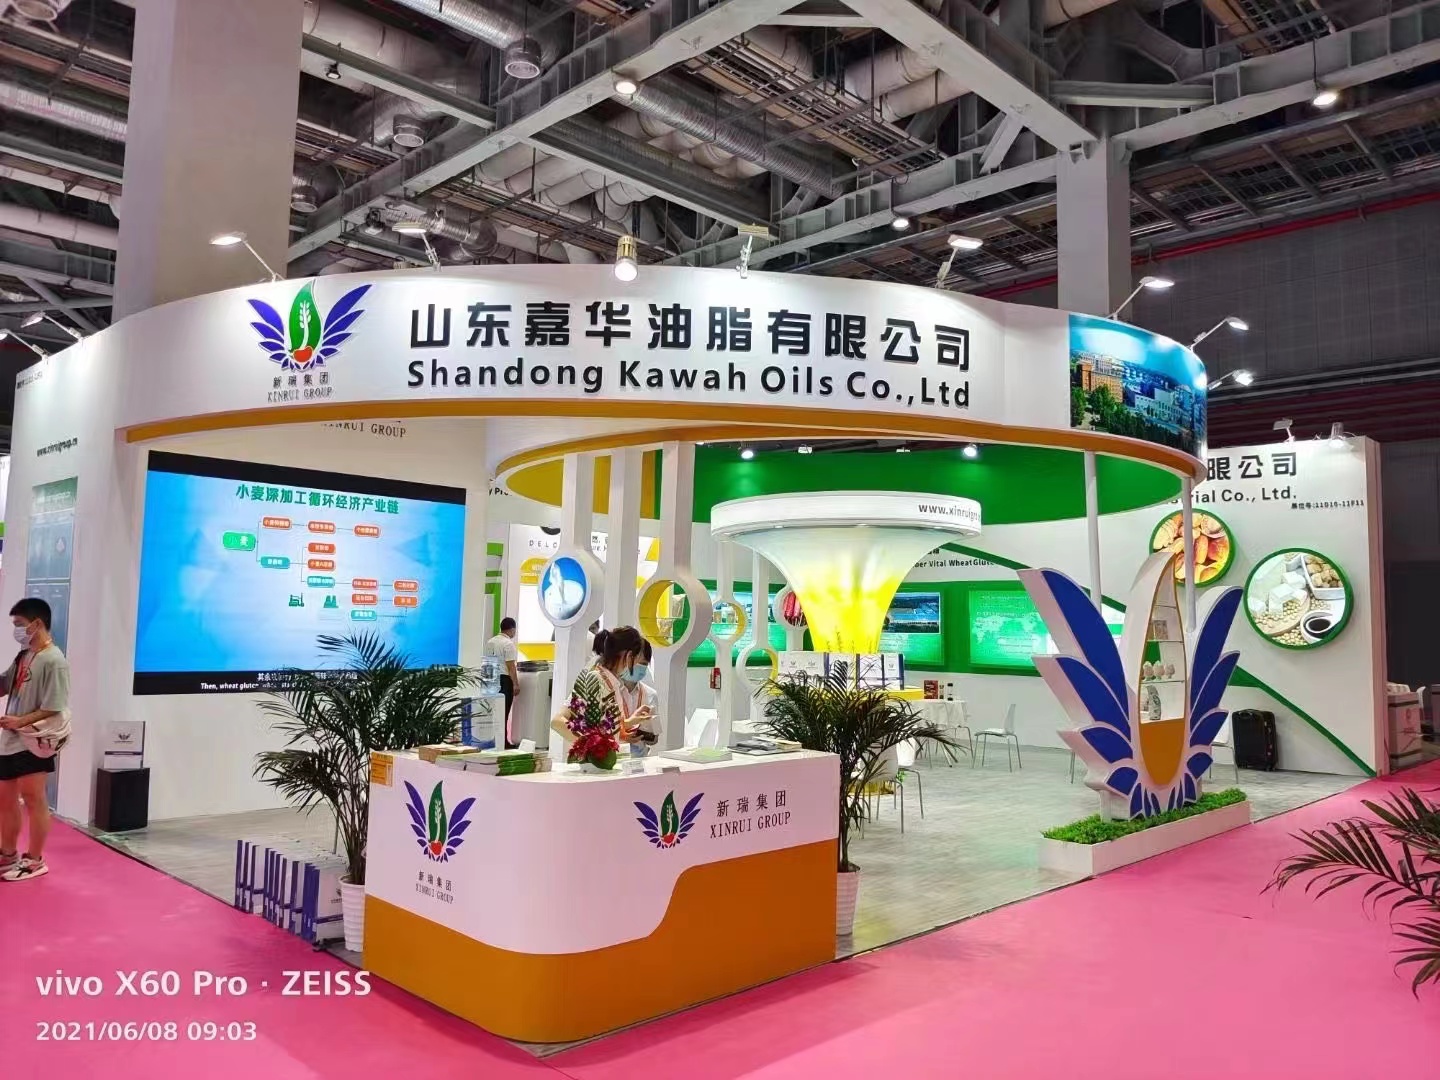 Xinrui Group will participate in the 26th China International Food Additives and Ingredients Exhibition!